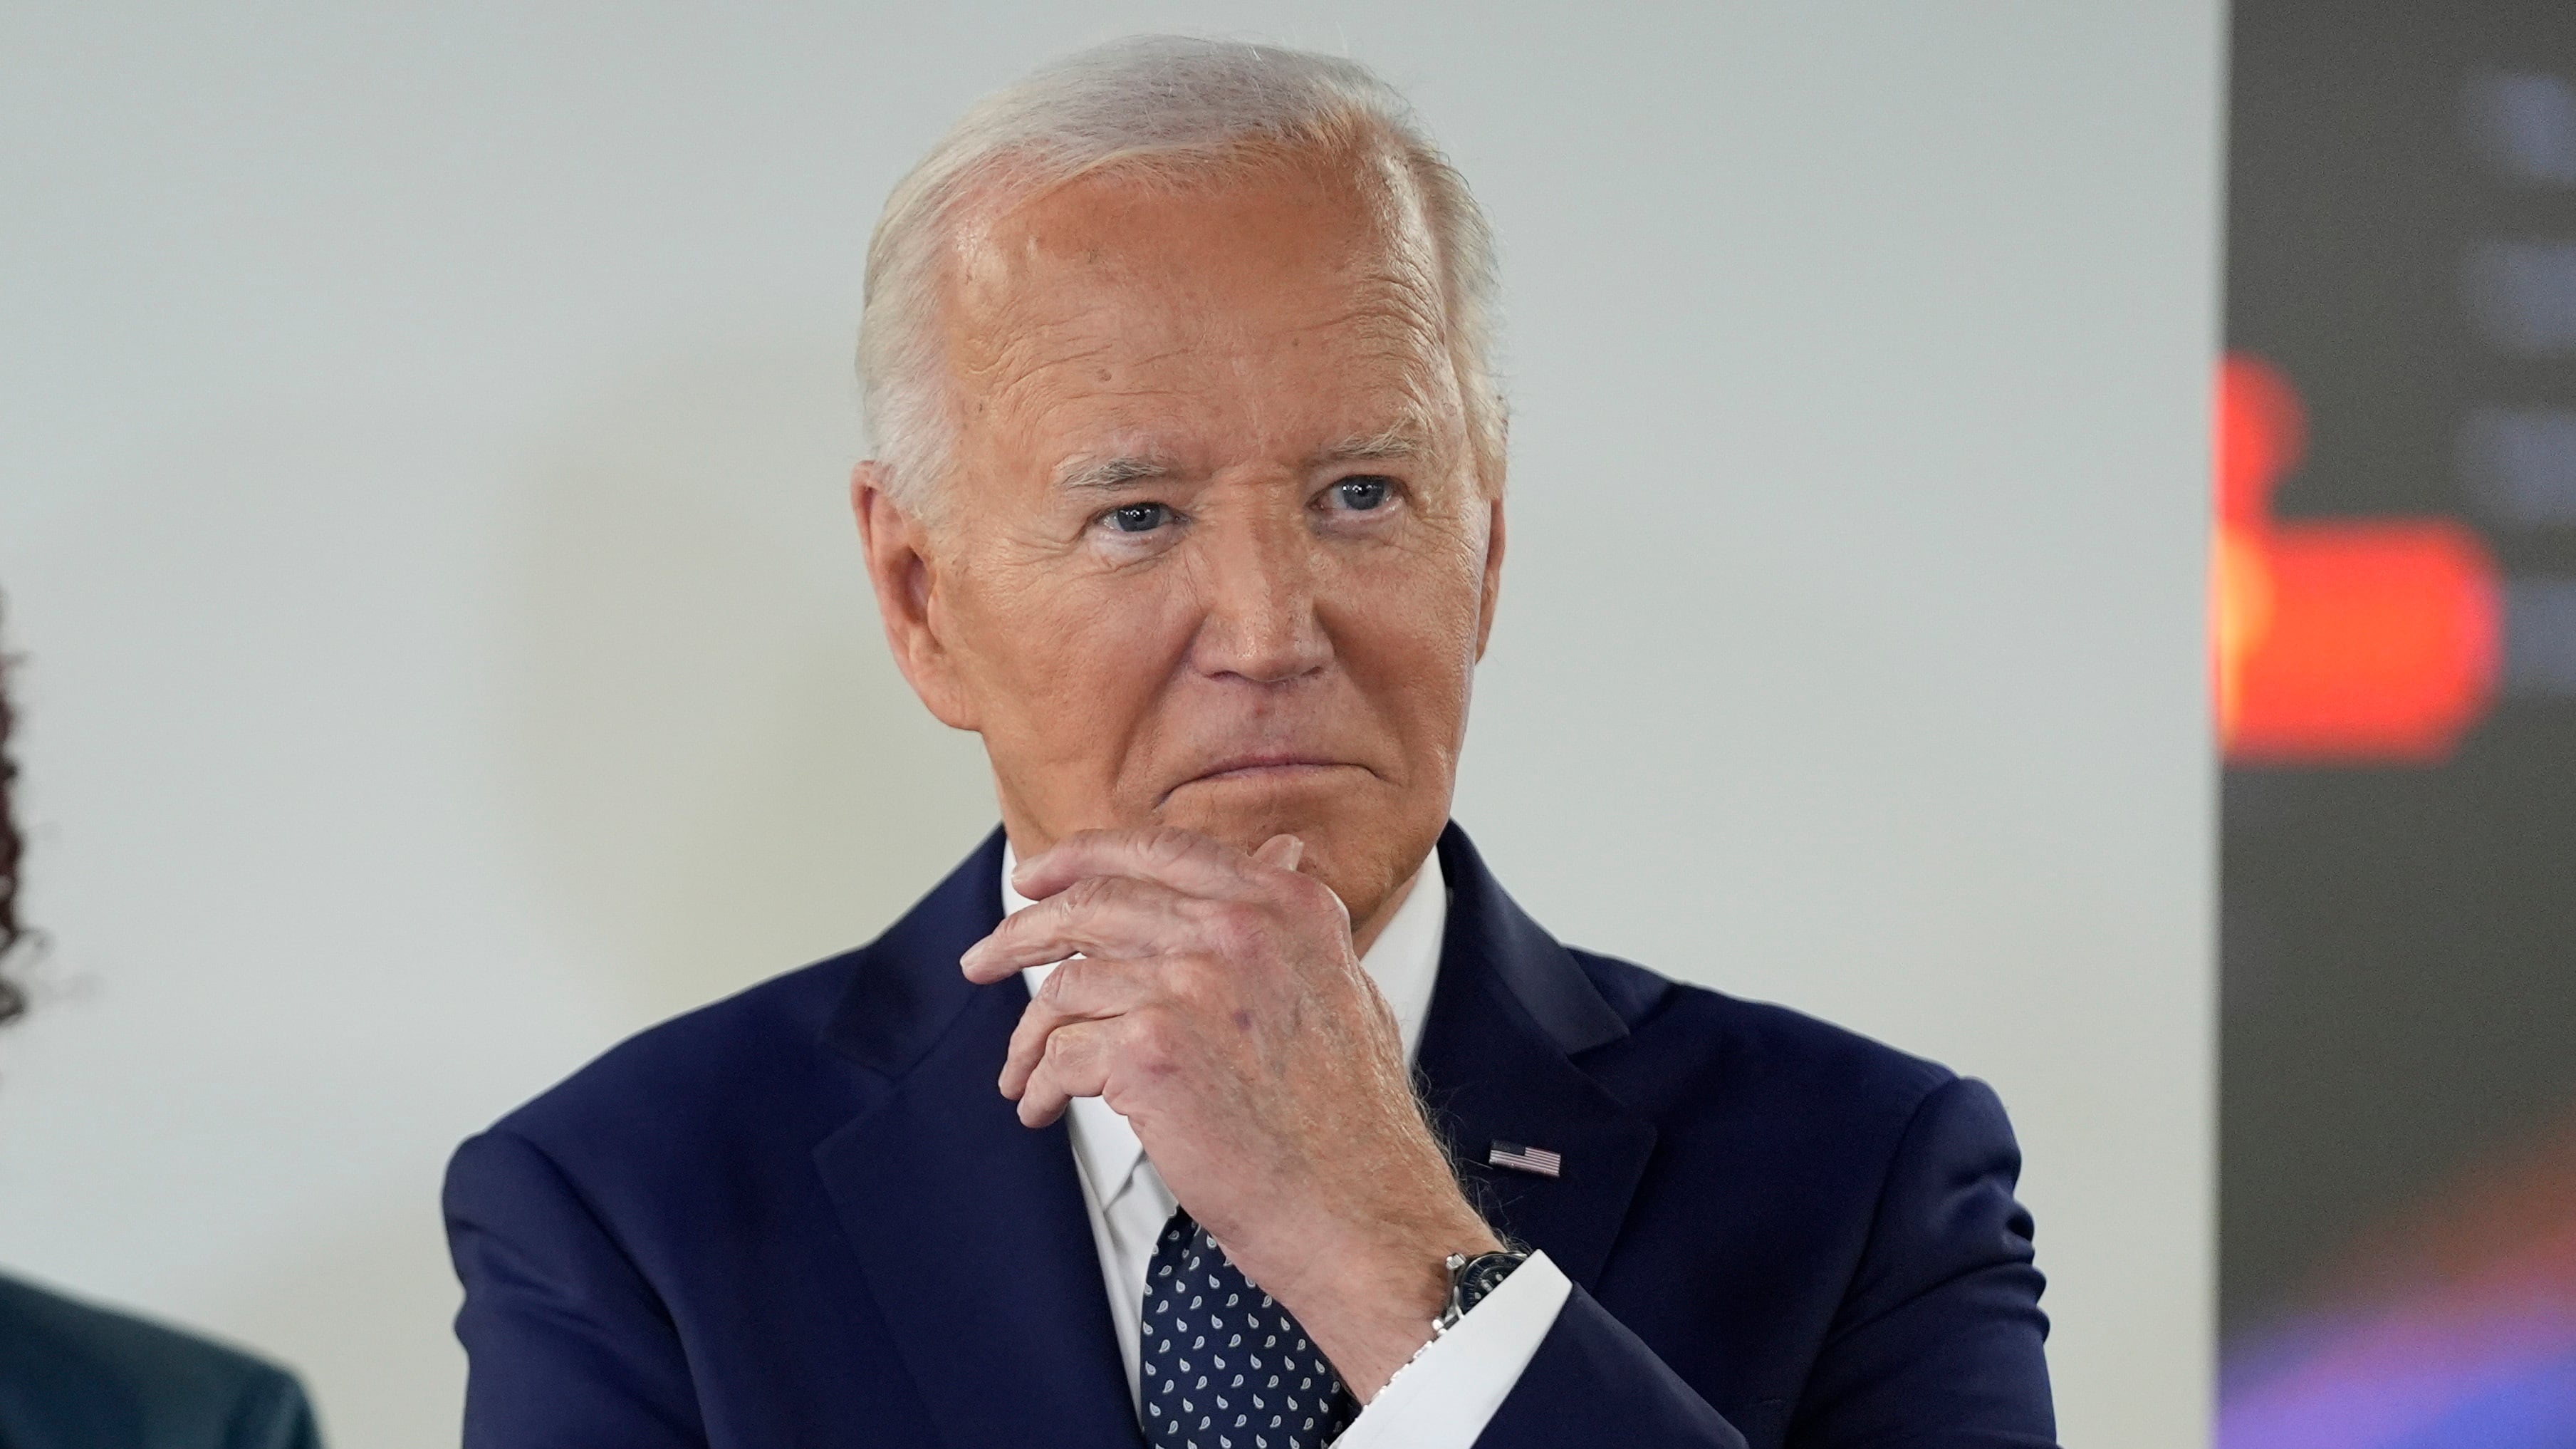 Joe Biden has insisted he has no intentions of pulling out of the race for the White House (AP Photo/Evan Vucci)